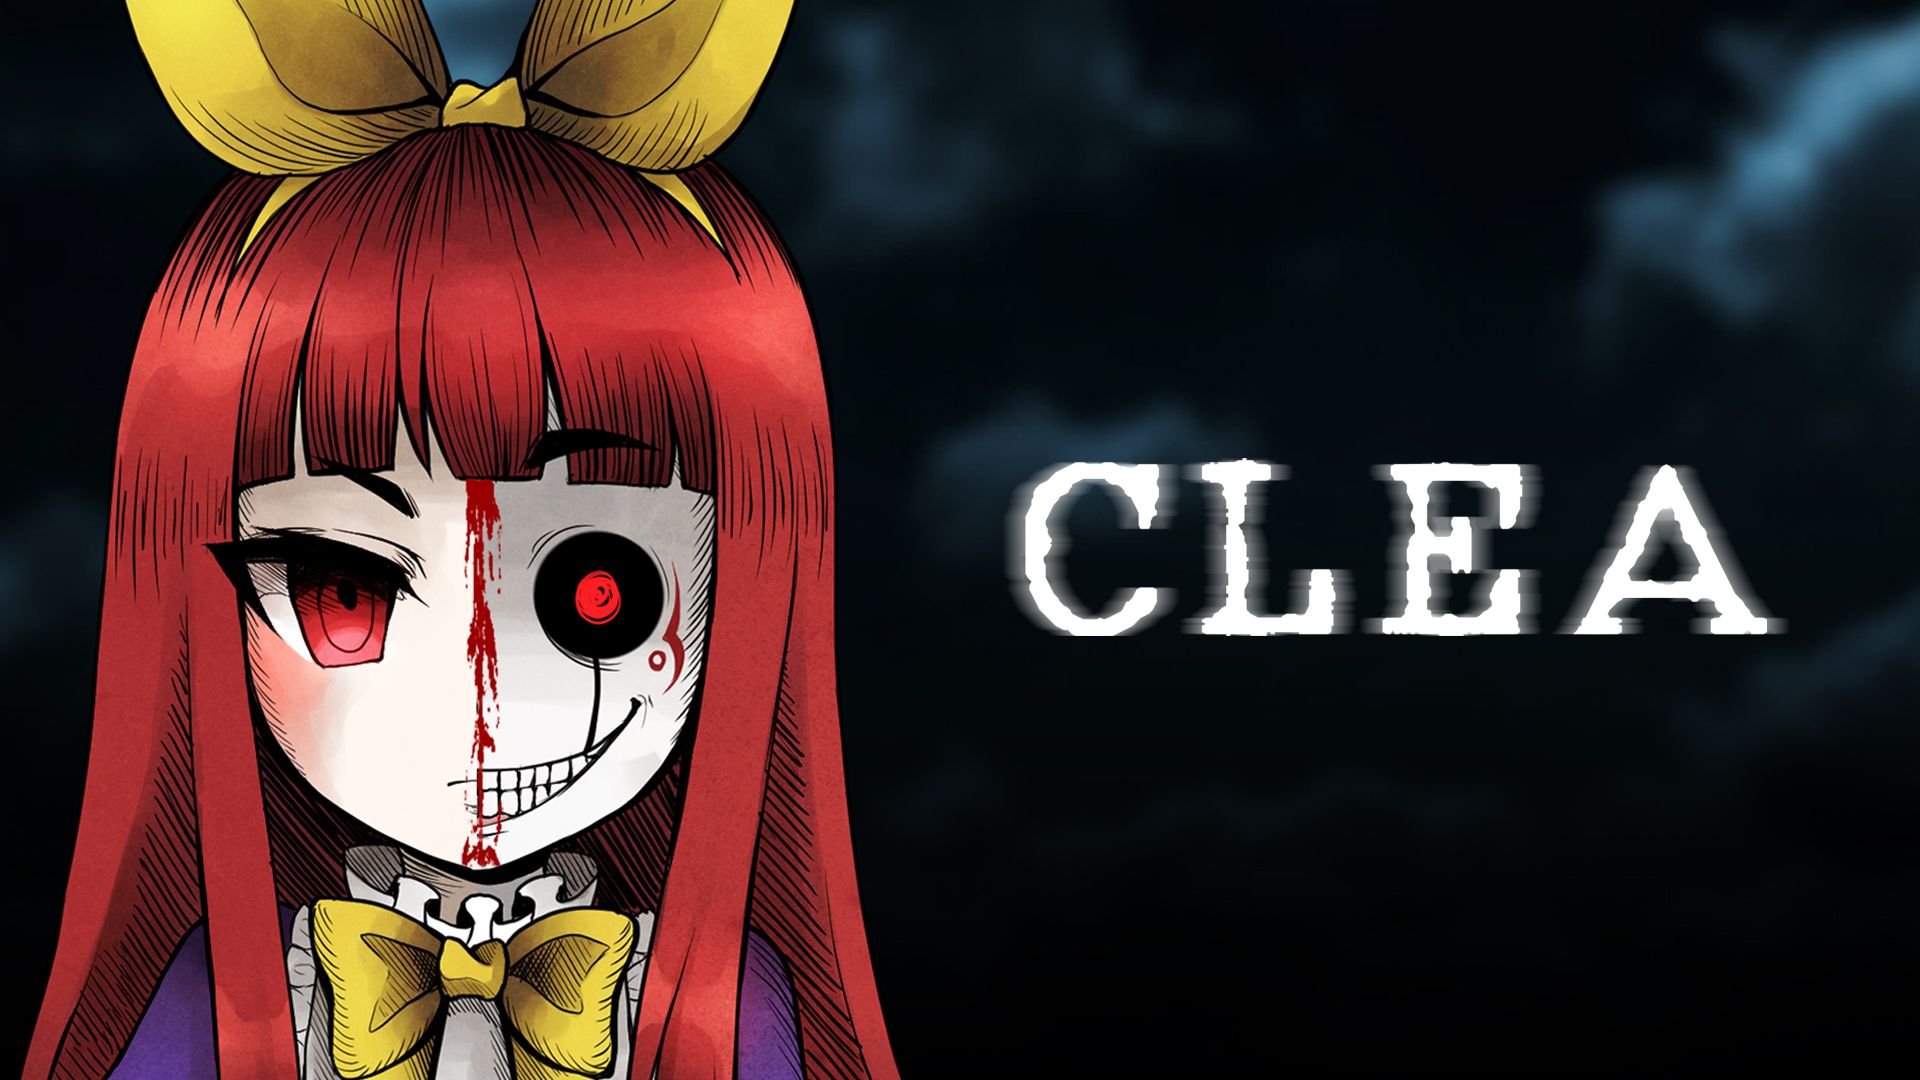 SpoOoOoky Horror Game Clea Launches on Switch this Week